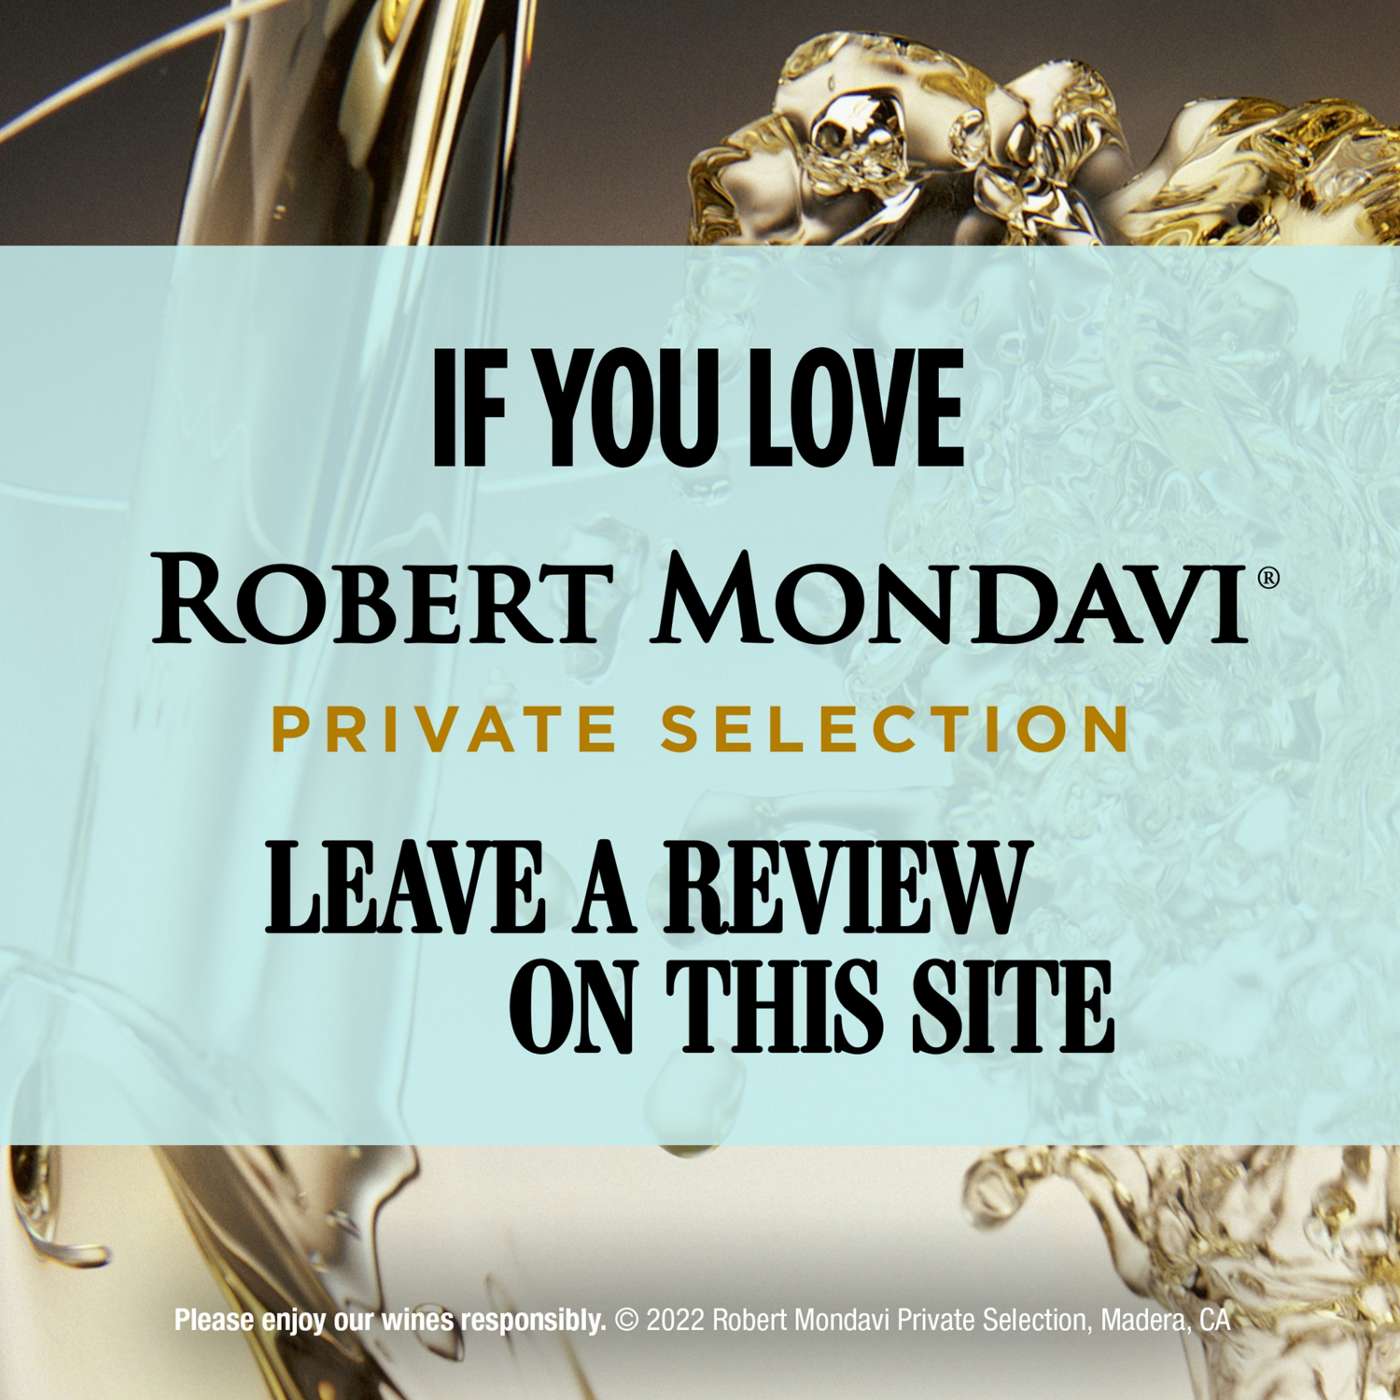 Robert Mondavi Private Selection Selection Lightly Bubbled Pinot Grigio White Wine 750 mL Bottle; image 10 of 11